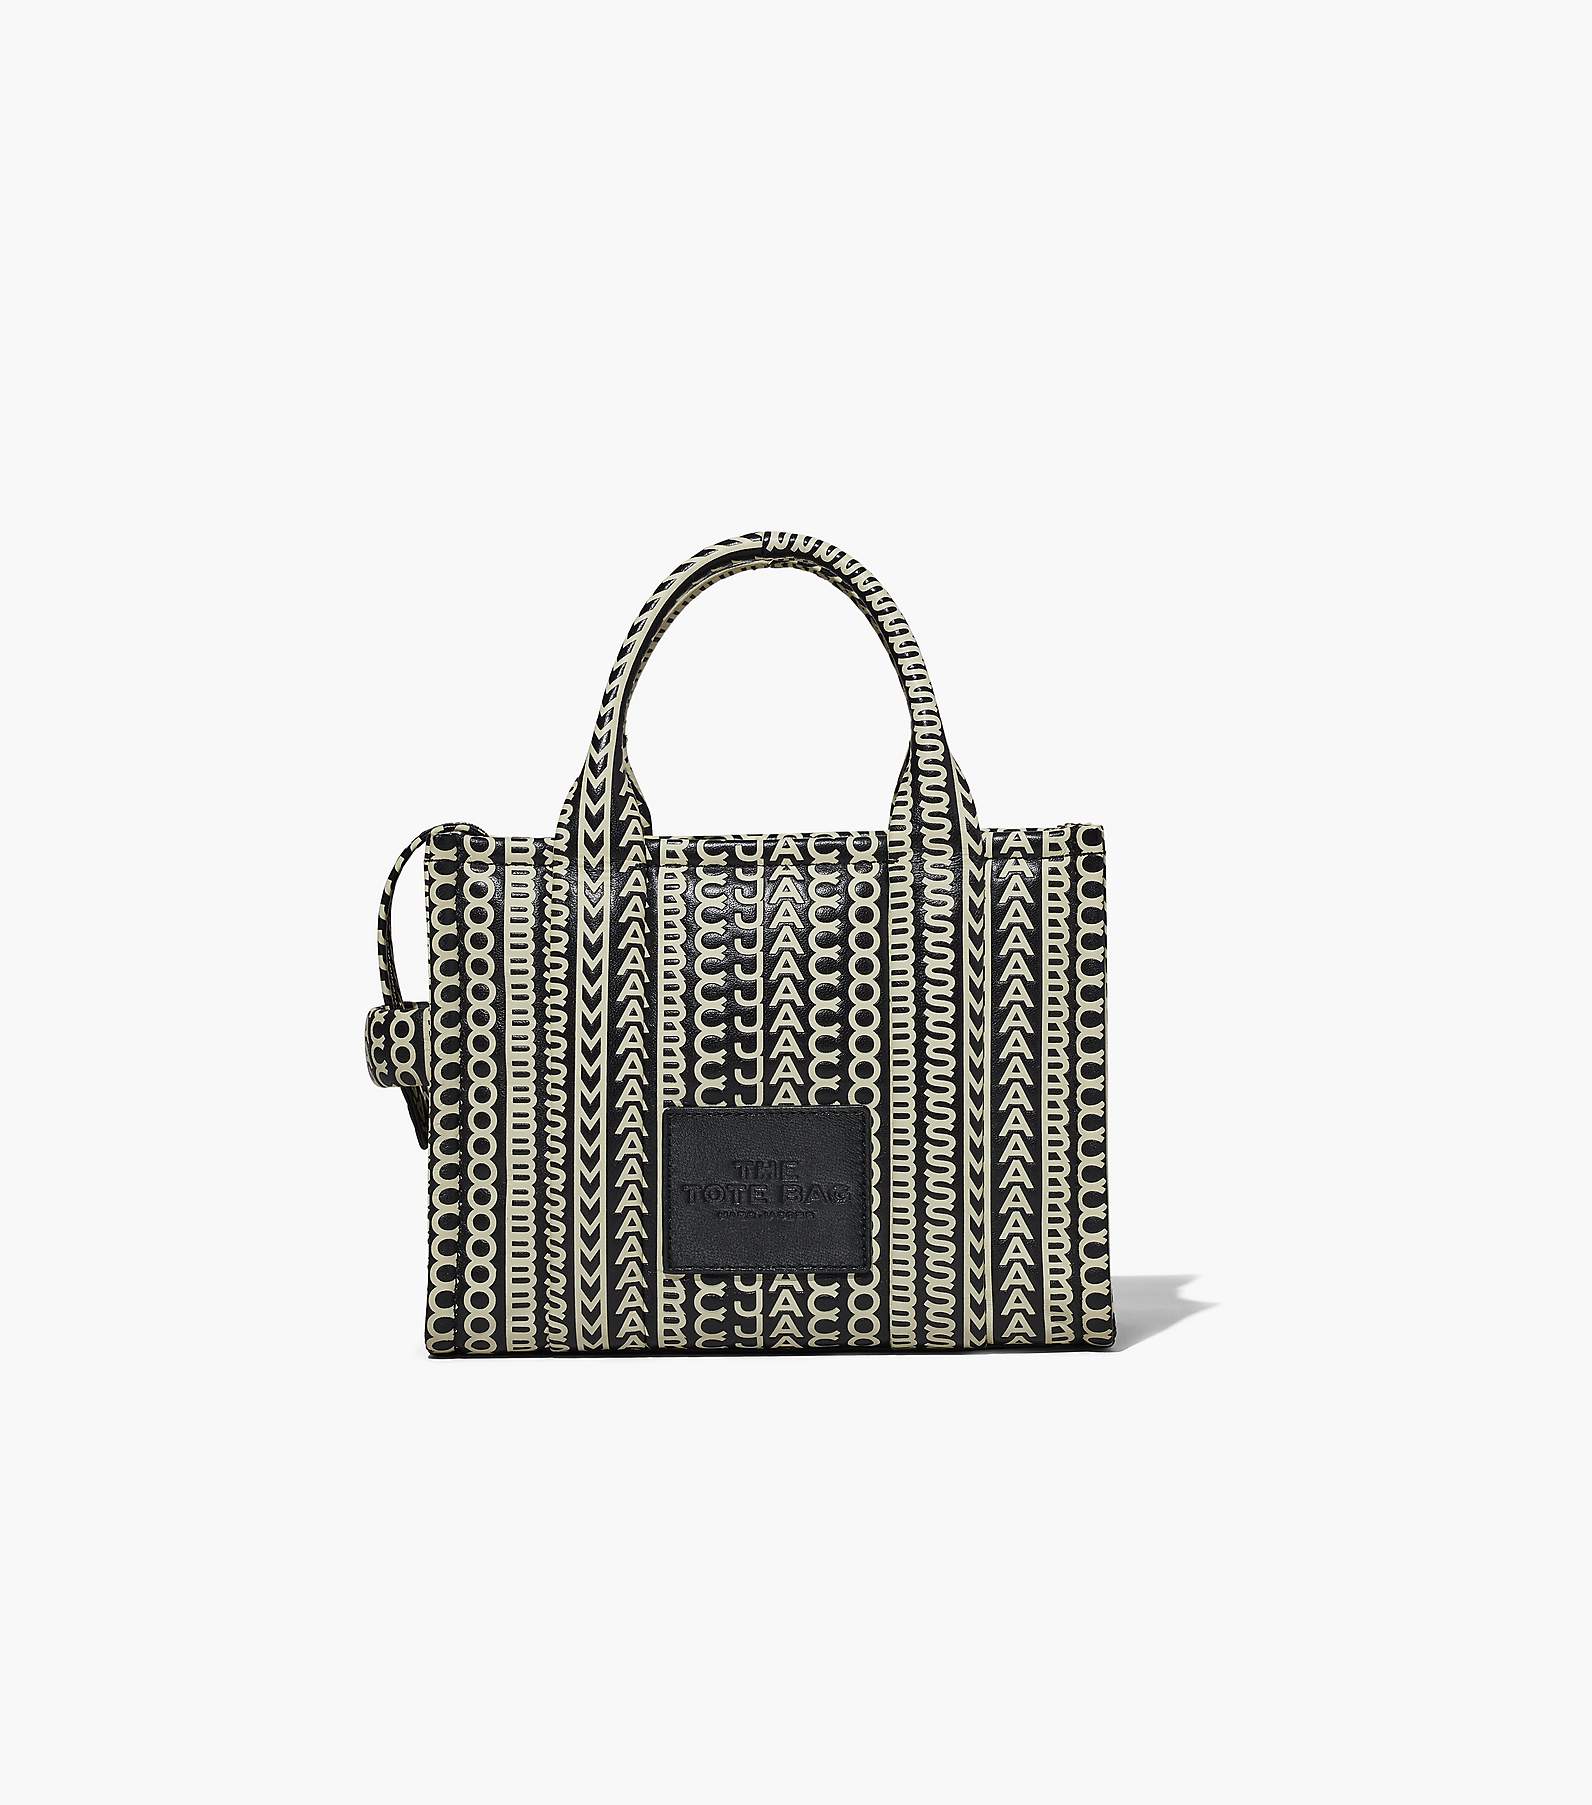 ZARA WOMEN'S BAGS & SHOES NEW COLLECTION / JANUARY 2023 